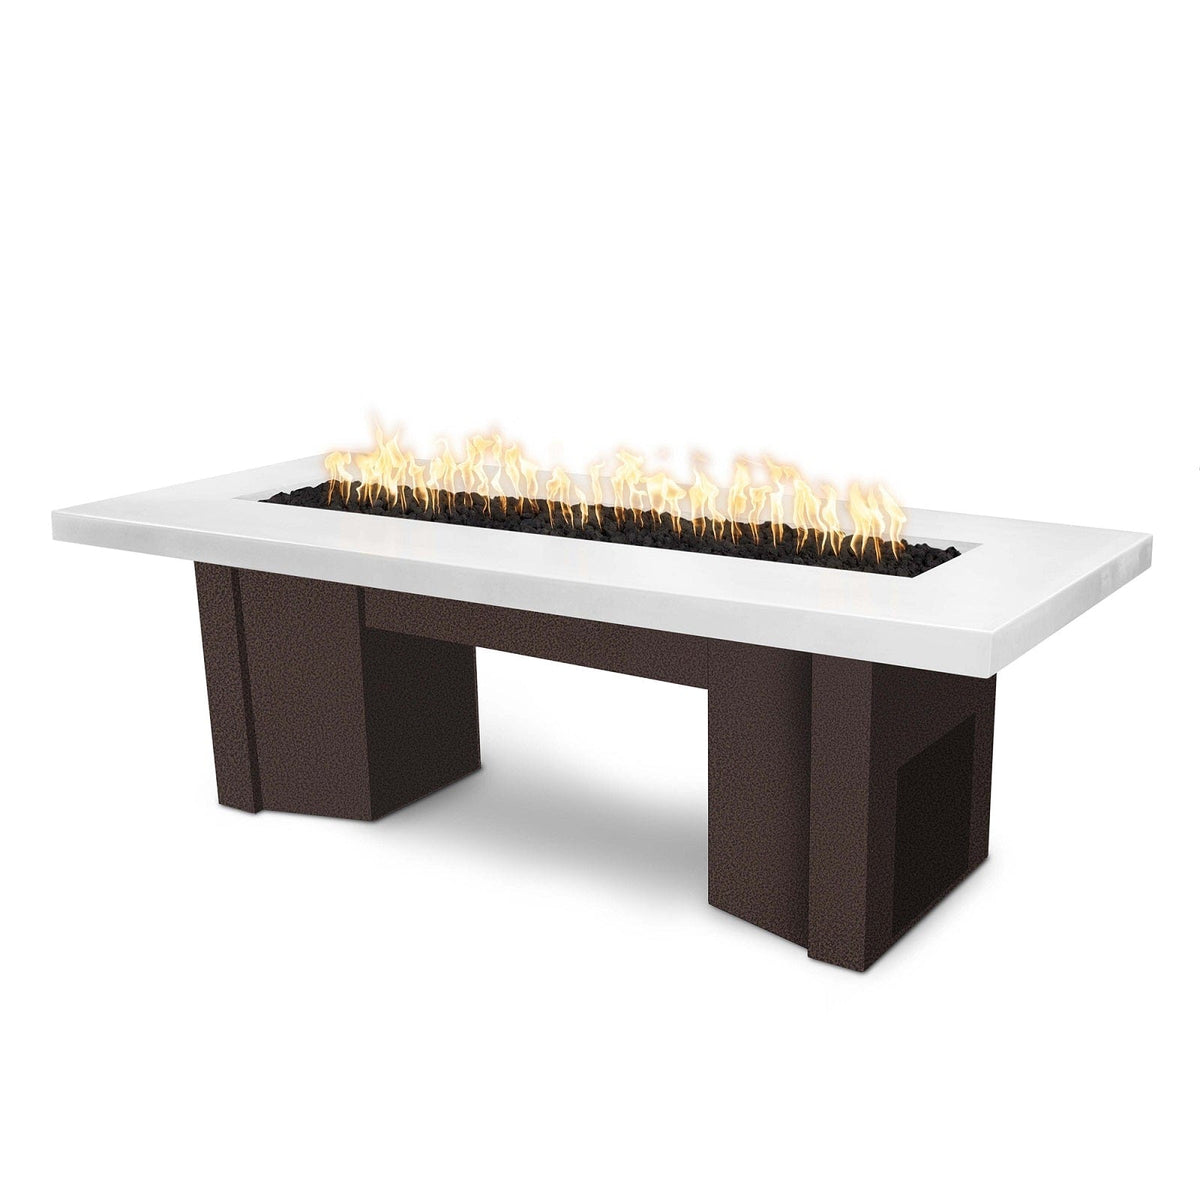 The Outdoor Plus Fire Features Limestone (-LIM) / Copper Vein Powder Coated Steel (-CPV) The Outdoor Plus 60&quot; Alameda Fire Table Smooth Concrete in Liquid Propane - 12V Electronic Ignition / OPT-ALMGFRC60E12V-LP